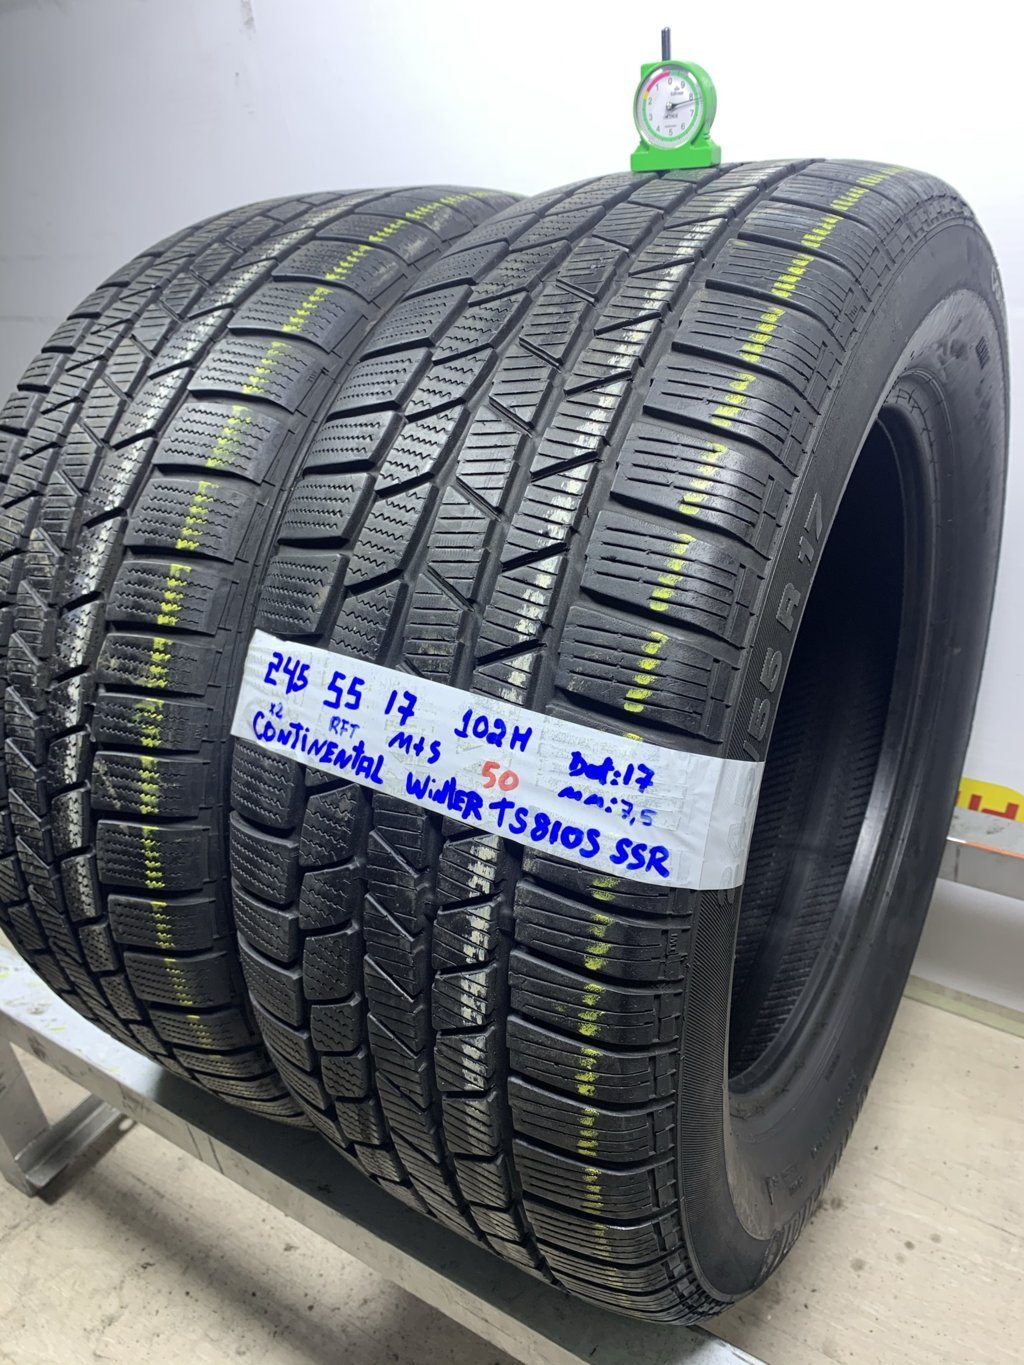 CONTINENTAL TS8105 245/55 R17 102H INVERNALE